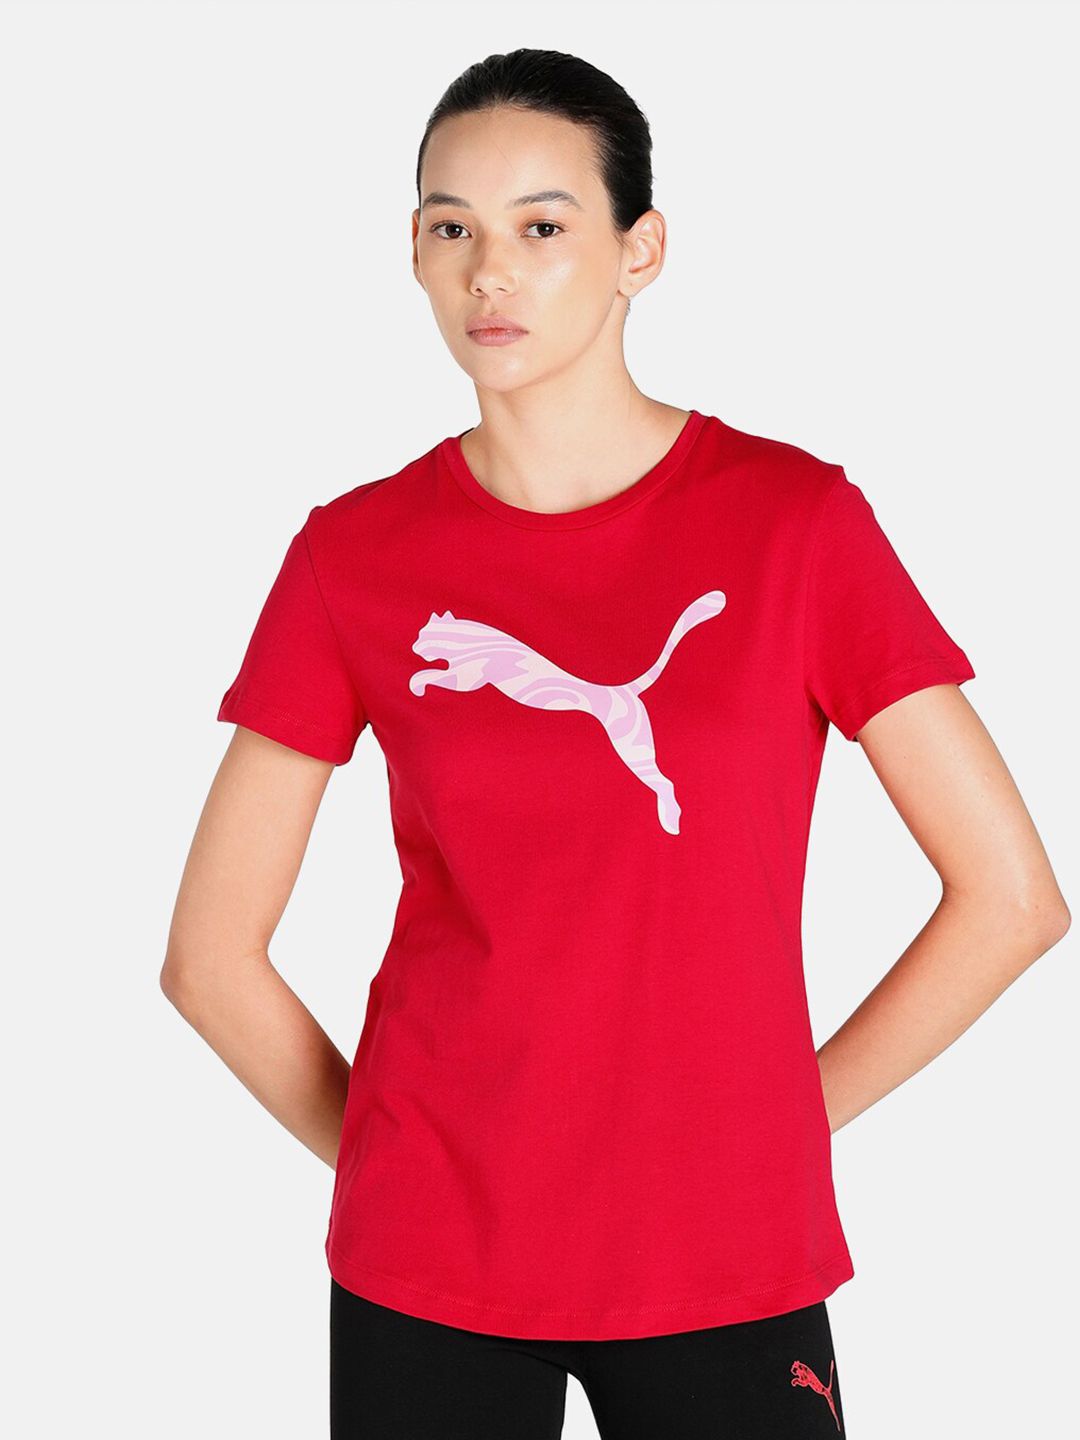 Puma Women Red Printed T-shirt Price in India